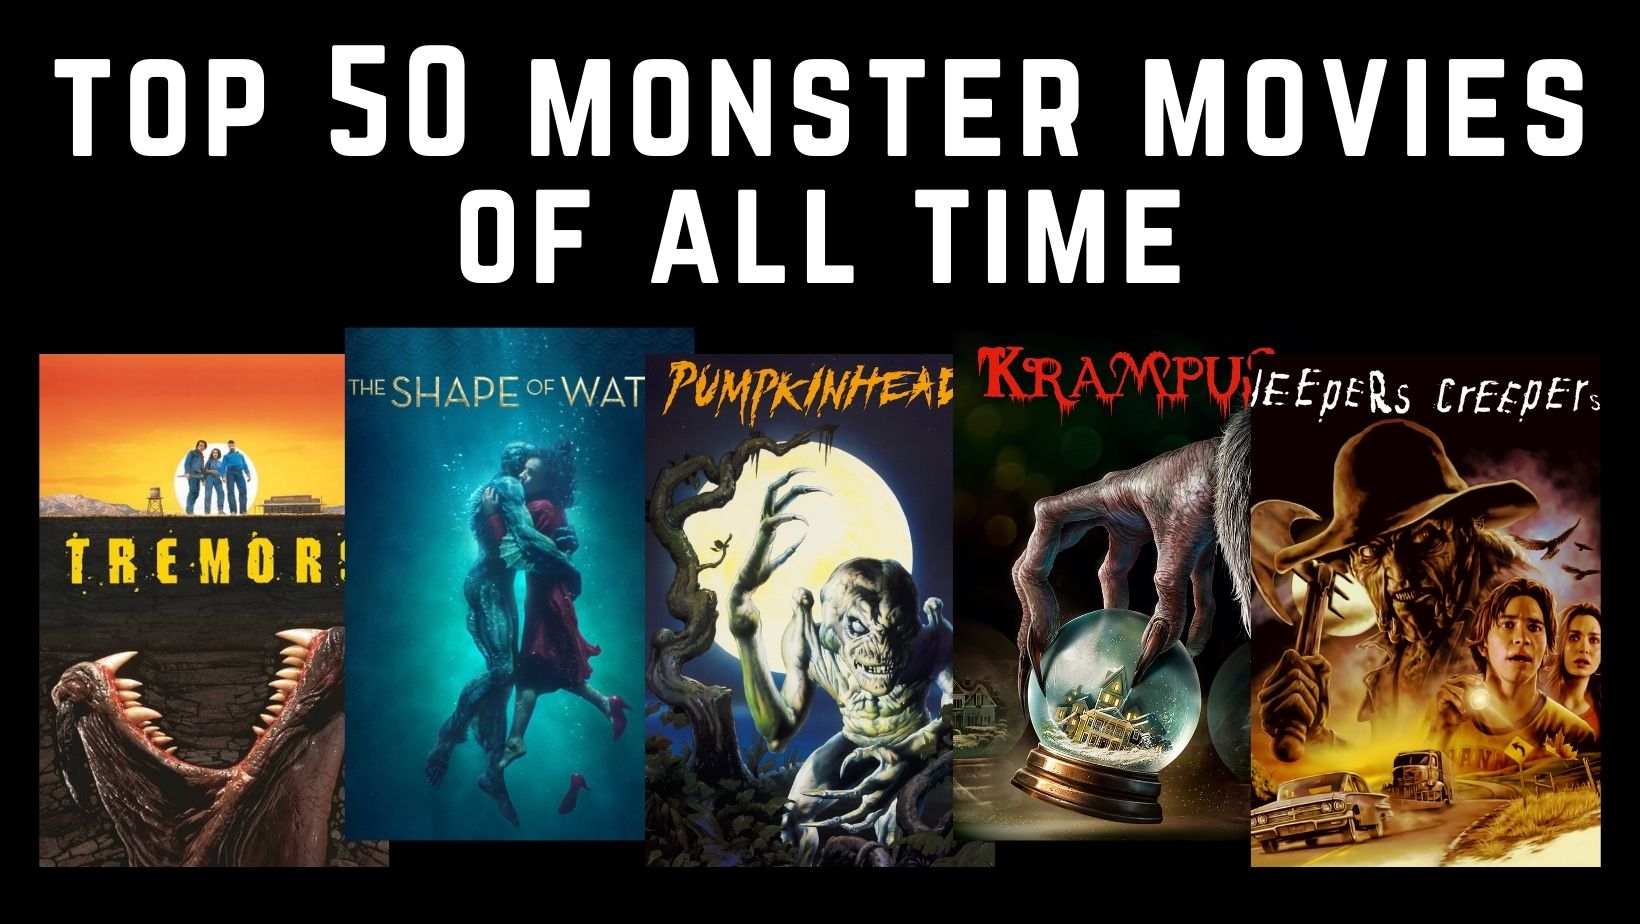 Top 50 Monster Movies of All Time